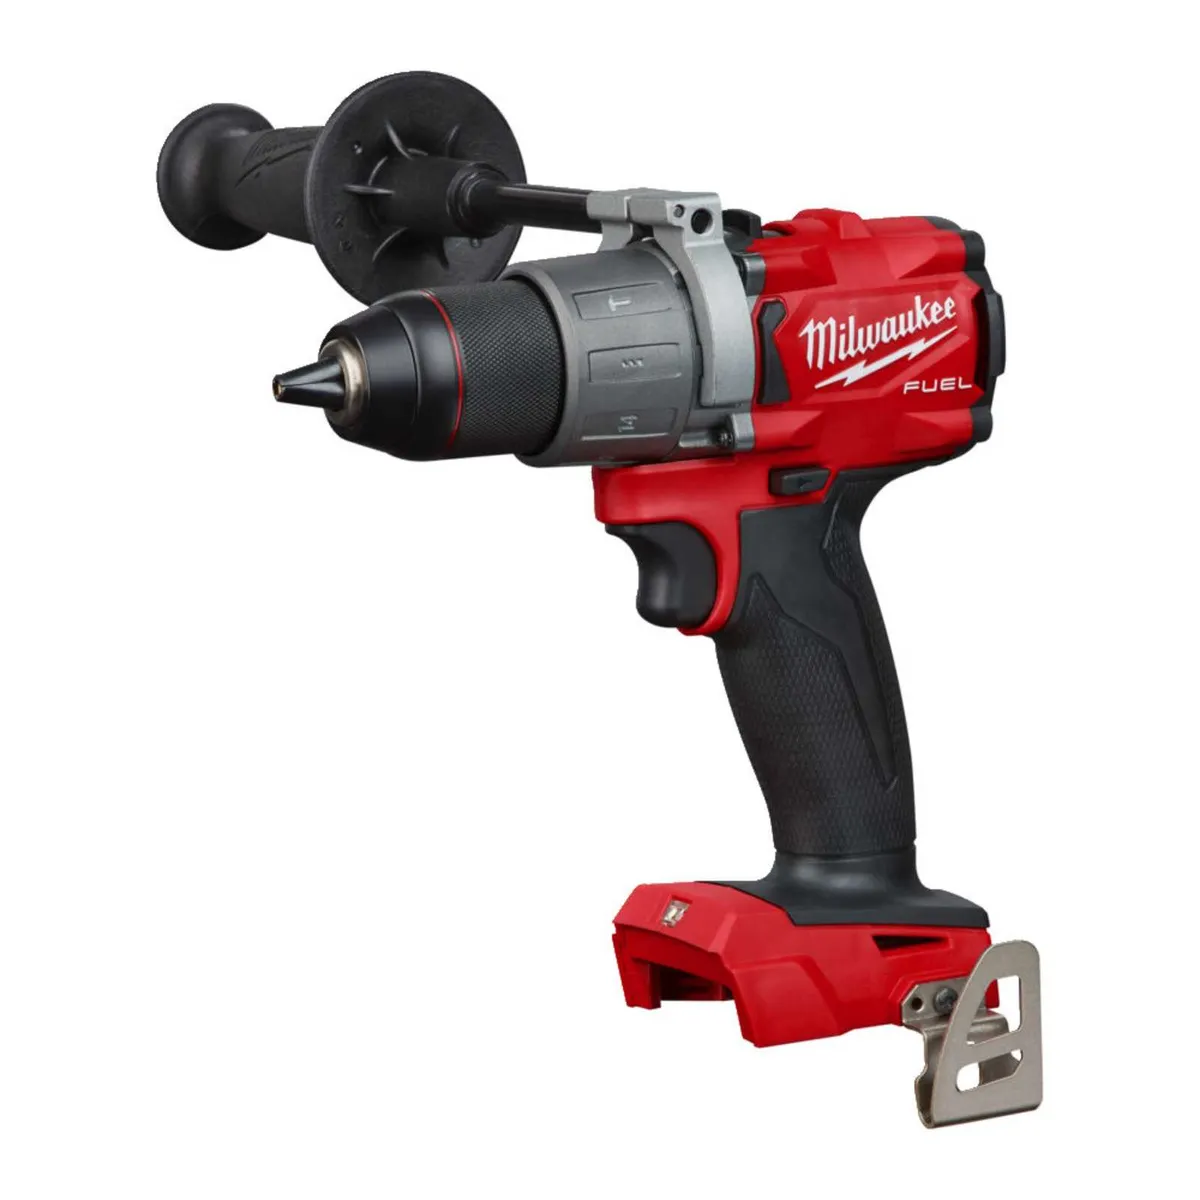 Milwaukee M18 Fuel Combi Drill Naked